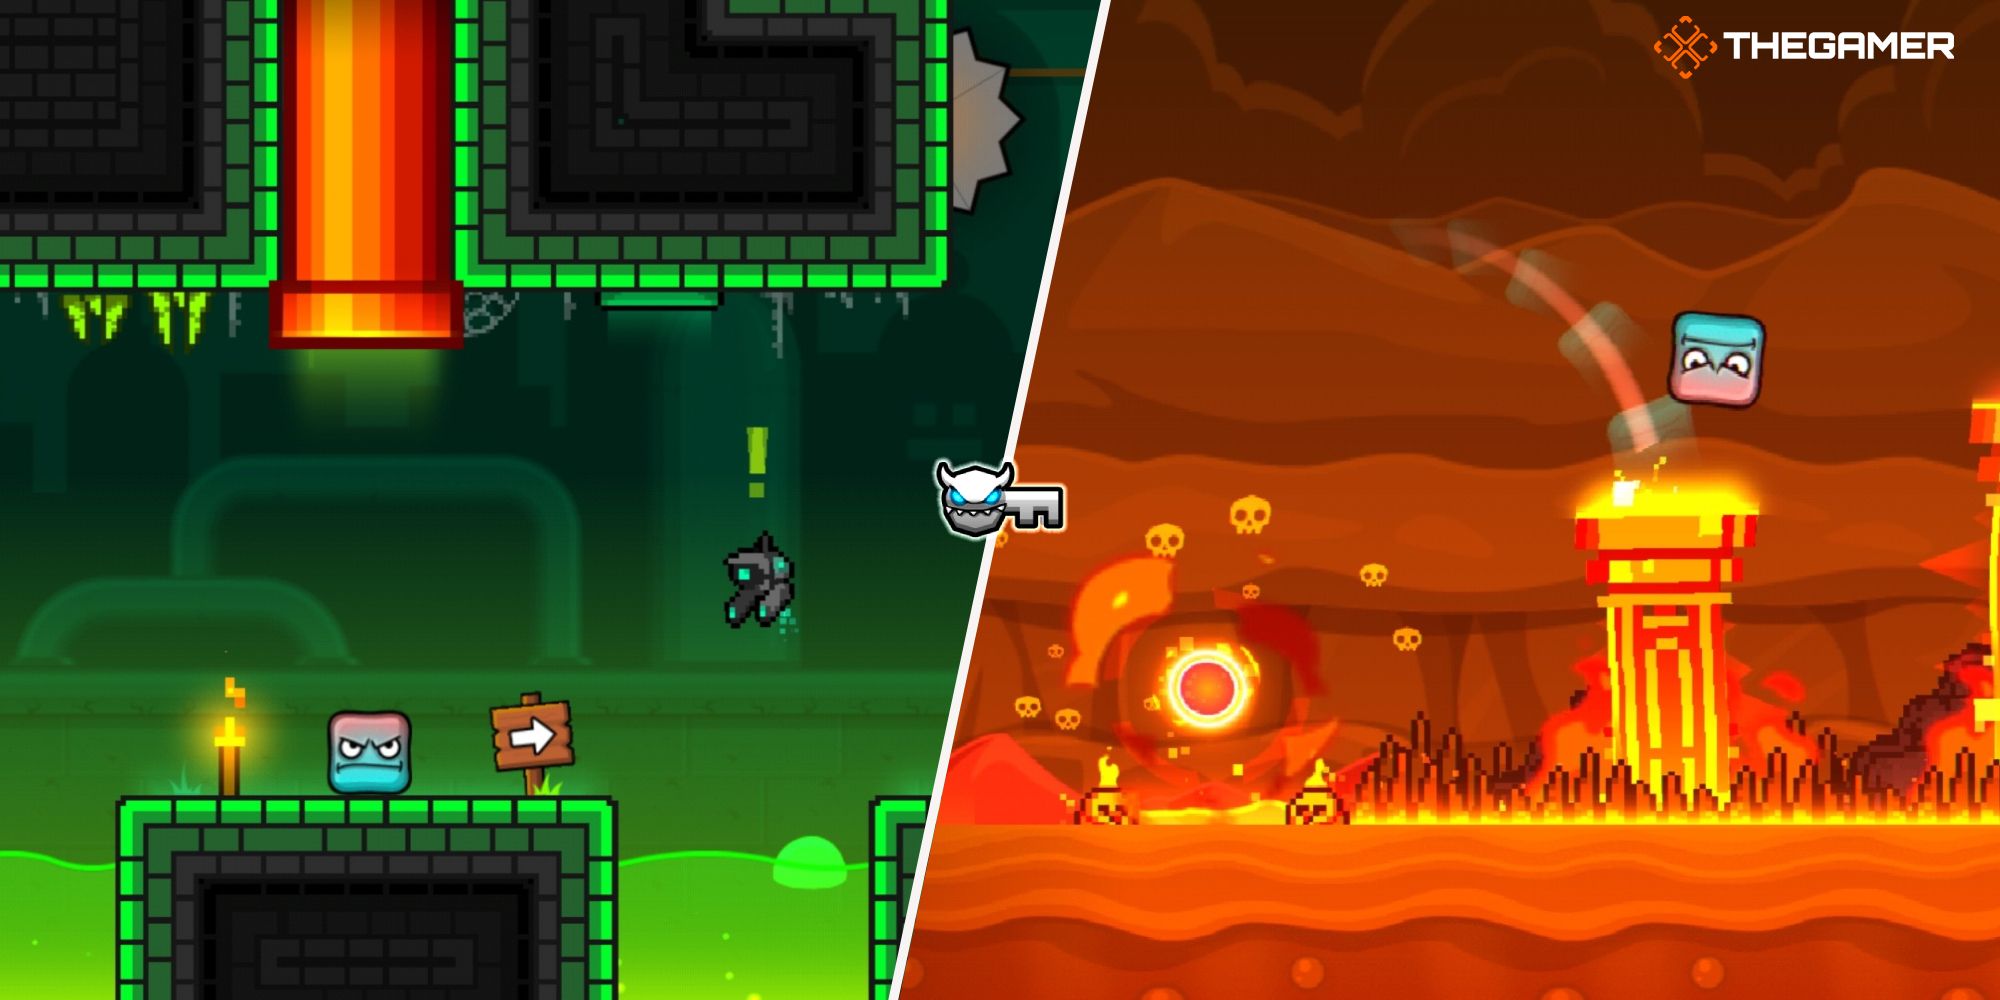 Right: Dash level, Left: the sewers level, in Geometry Dash